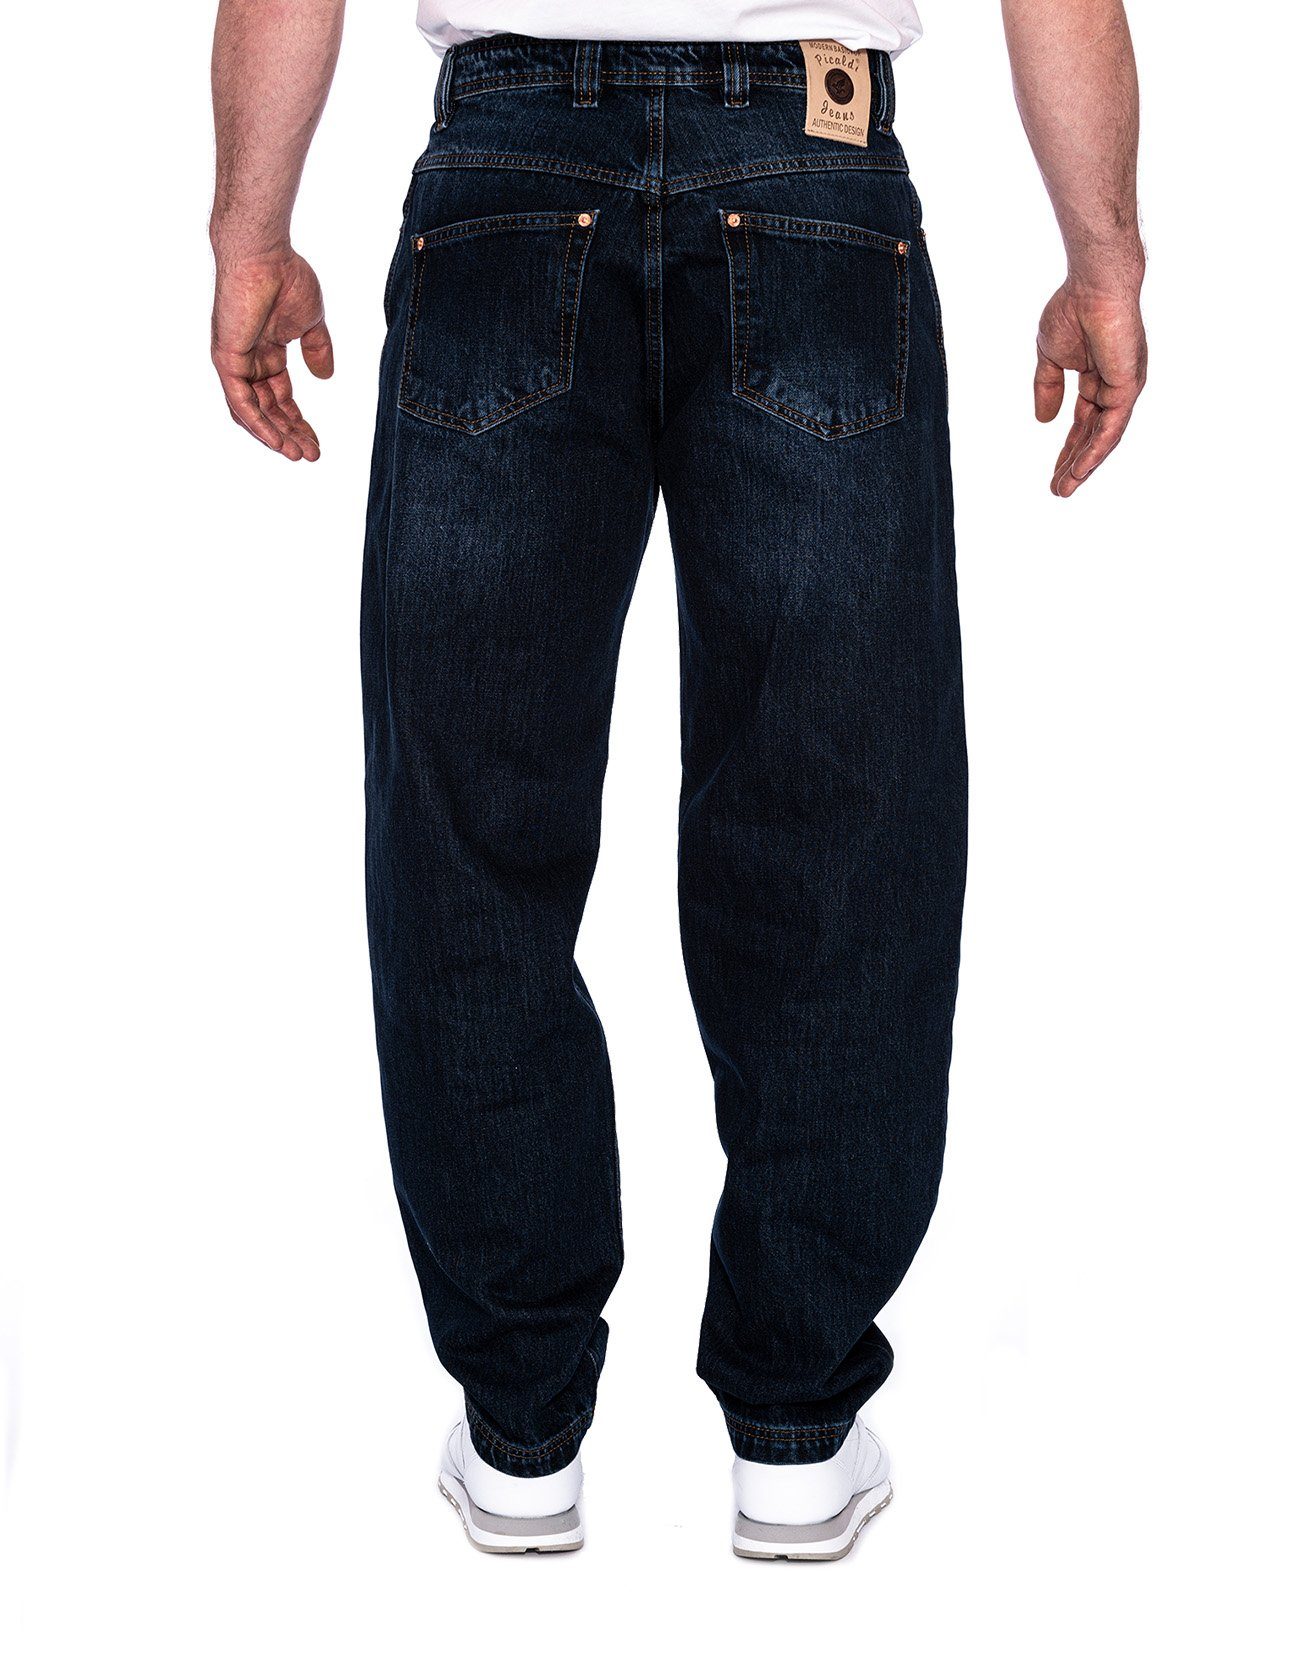 PICALDI Jeans Loose Weite Hurricane Jeans Pocket 471 Fit, Jeans Zicco Five